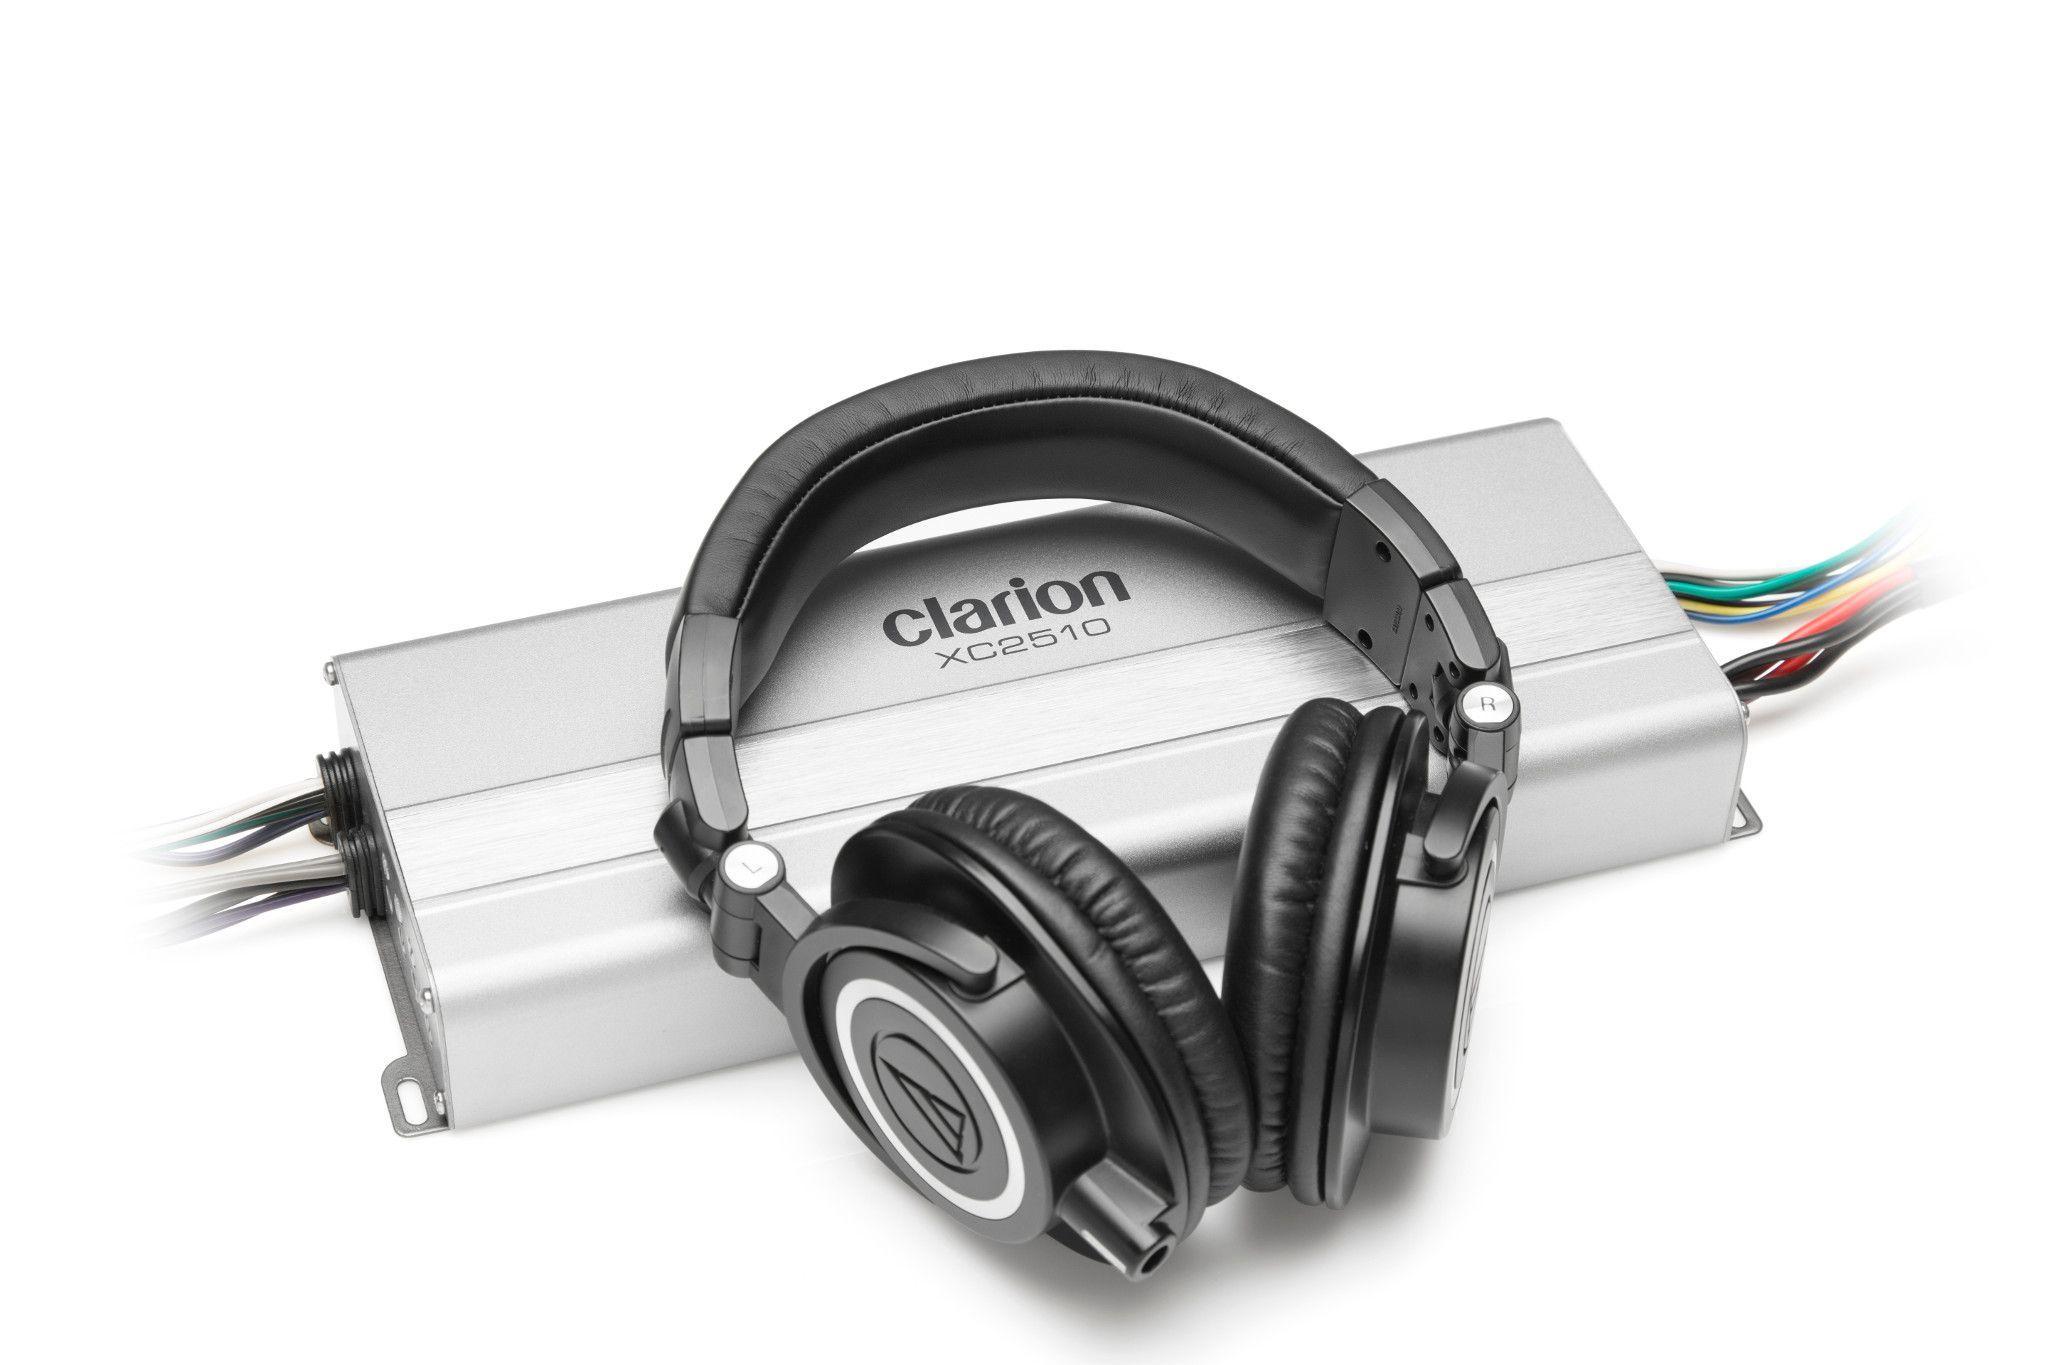 CLARION Compact 5-Channel System Amplifier – Rated Power (1% THD+N, 14.4V): Main Channels: 50W x 4 @ 4 ohms / 75W x 4 @ 2 ohms Subwoofer Channel: 200W x 1 @ 4 ohms / 300W x 1 @ 2 ohms – Features: vari